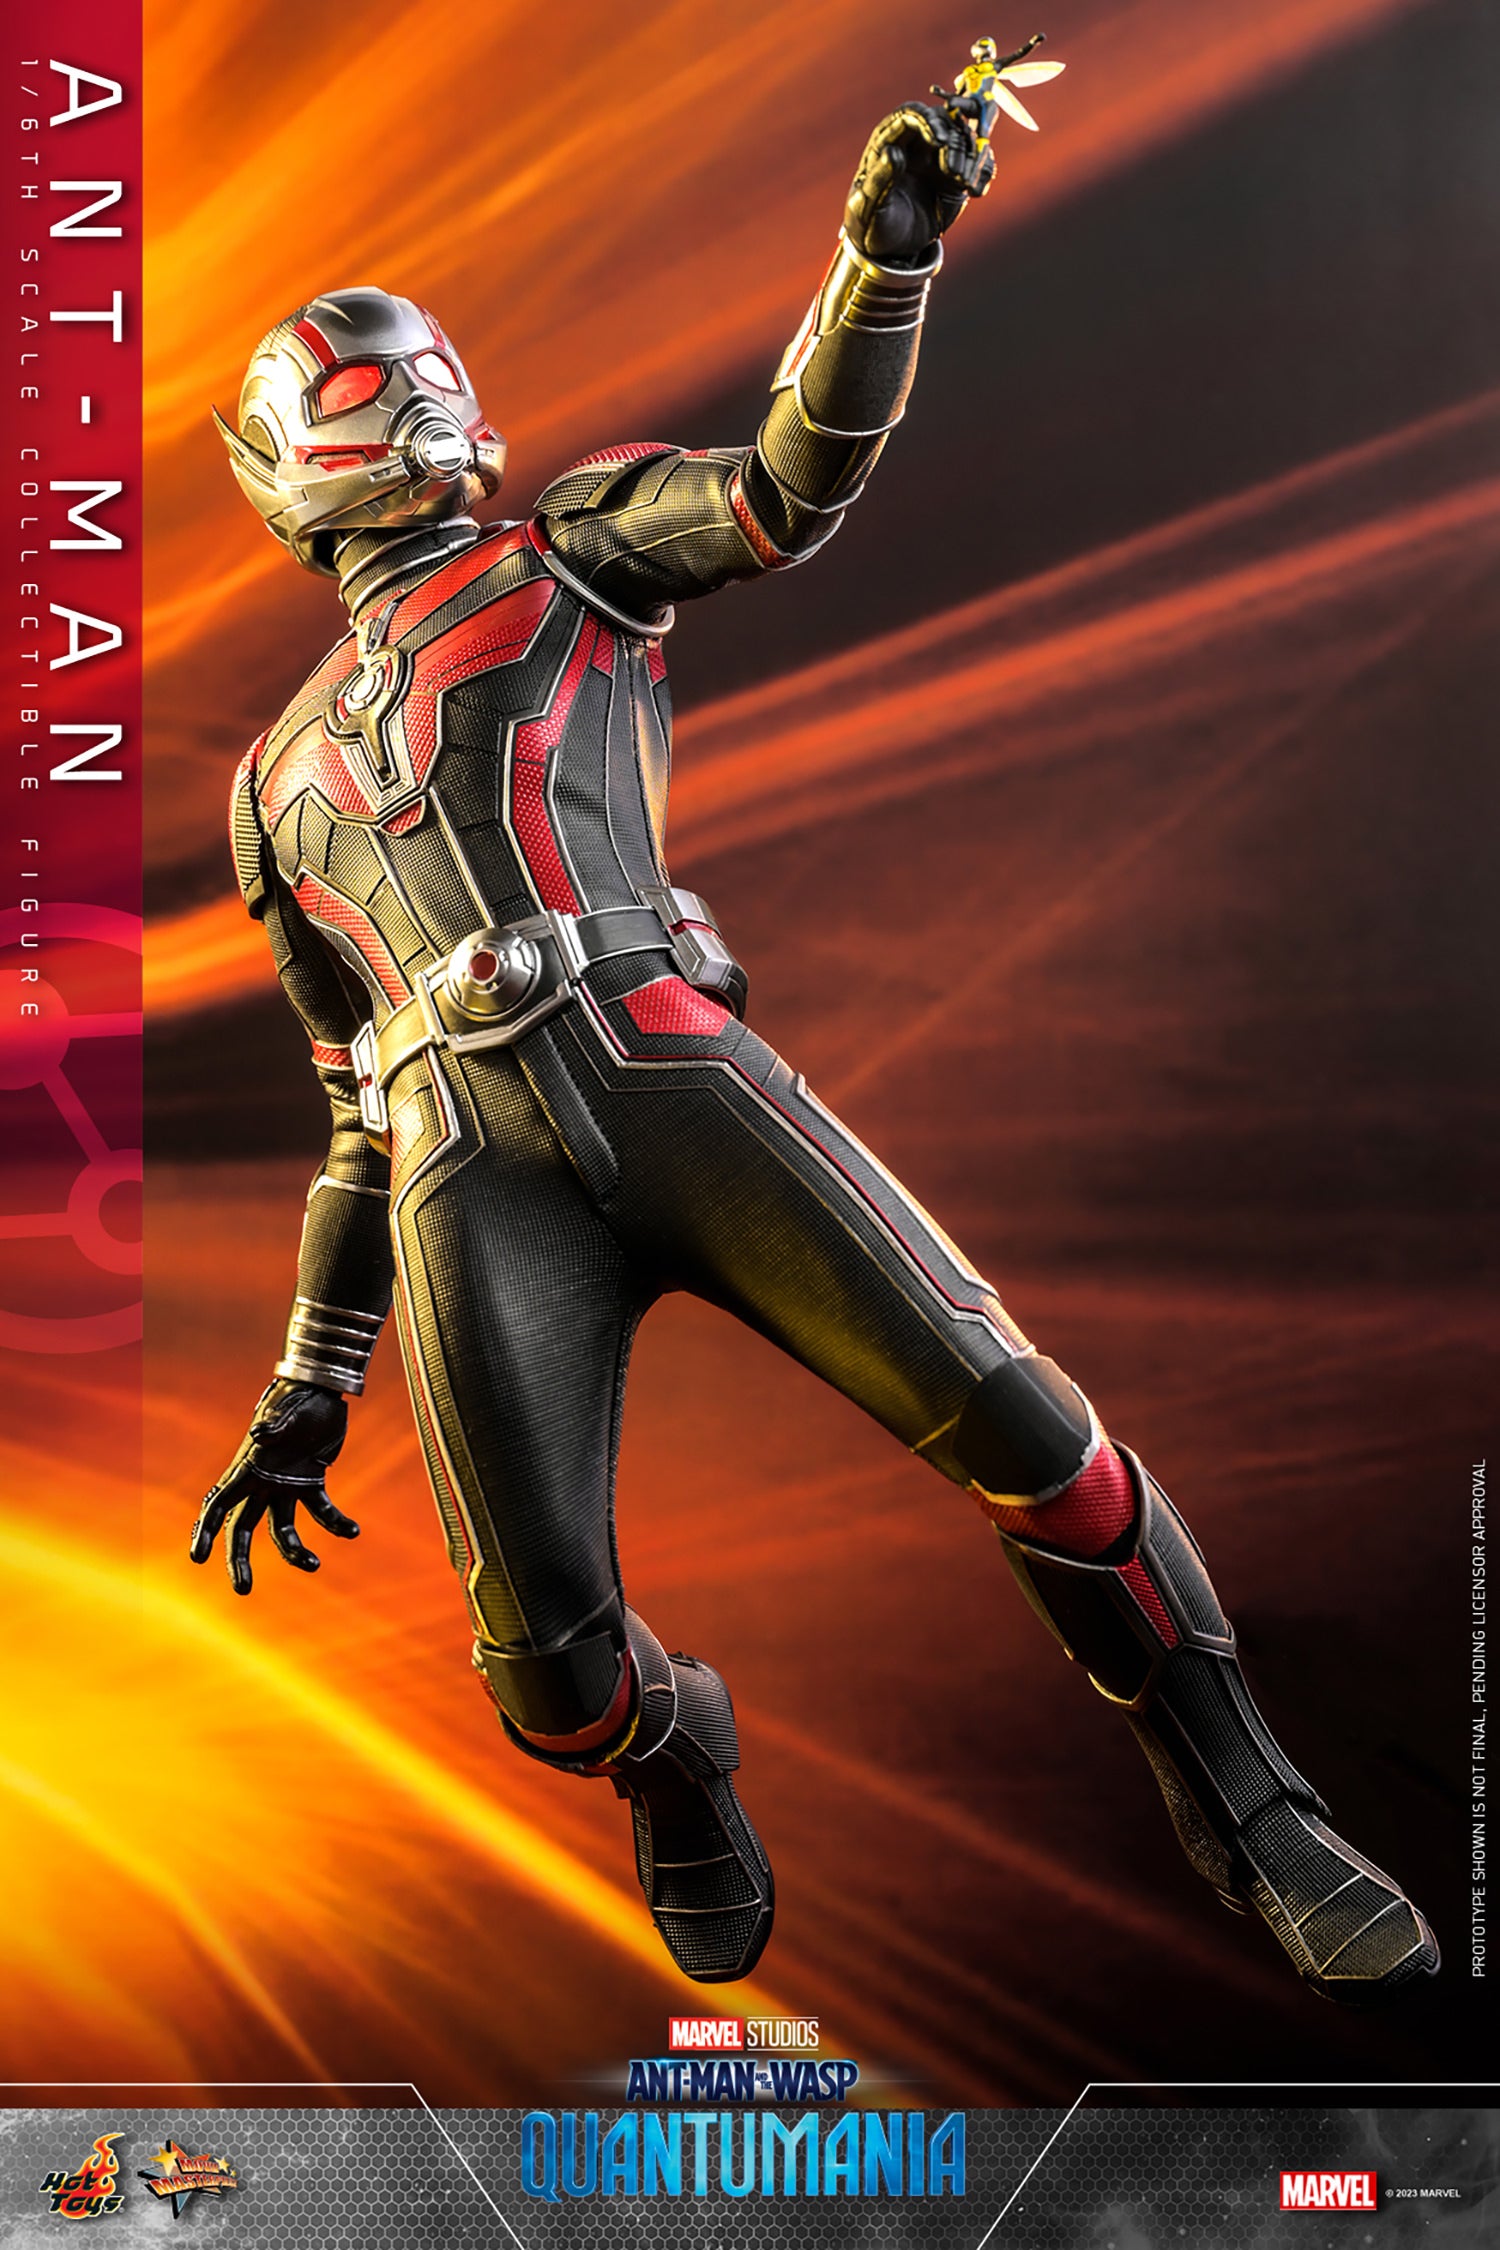 Marvel Ant-Man and The Wasp: Ant-Man — Secret Compass